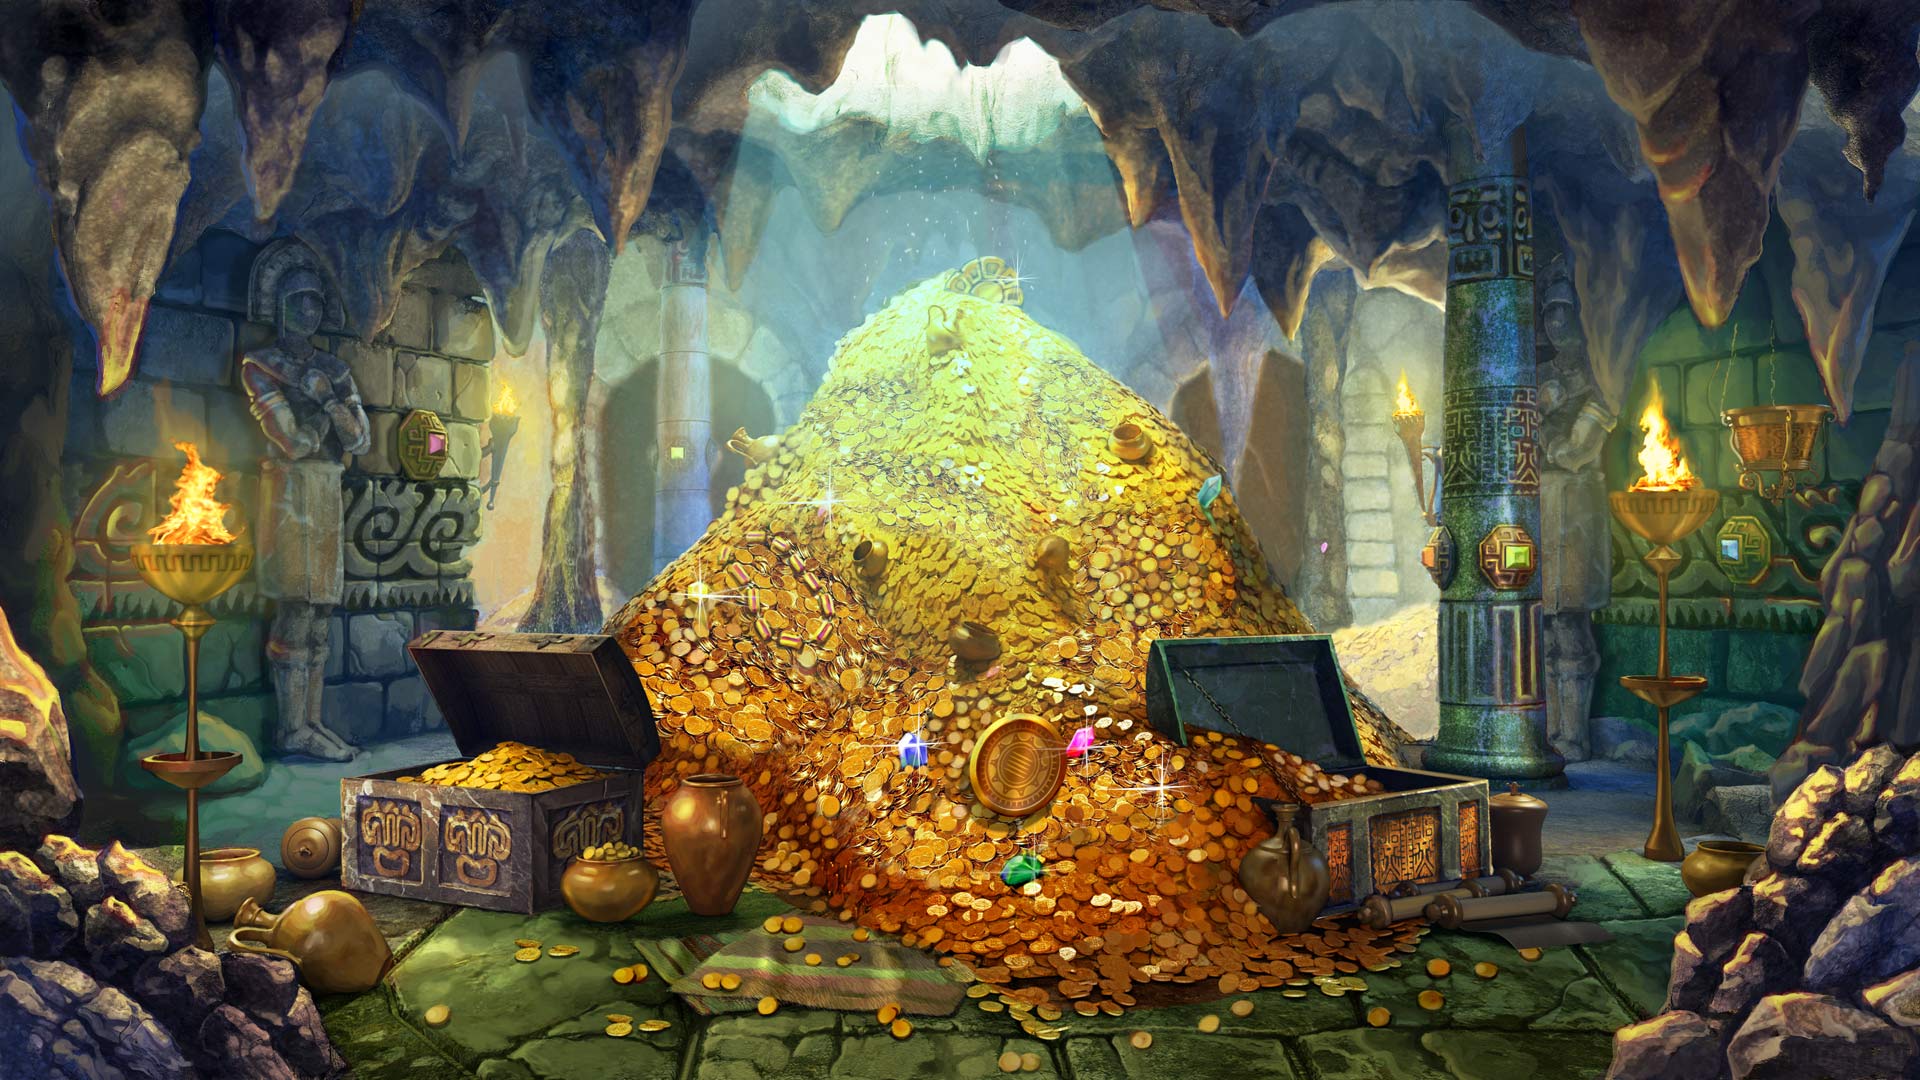 The Treasures of Montezuma 3 download the new version for windows